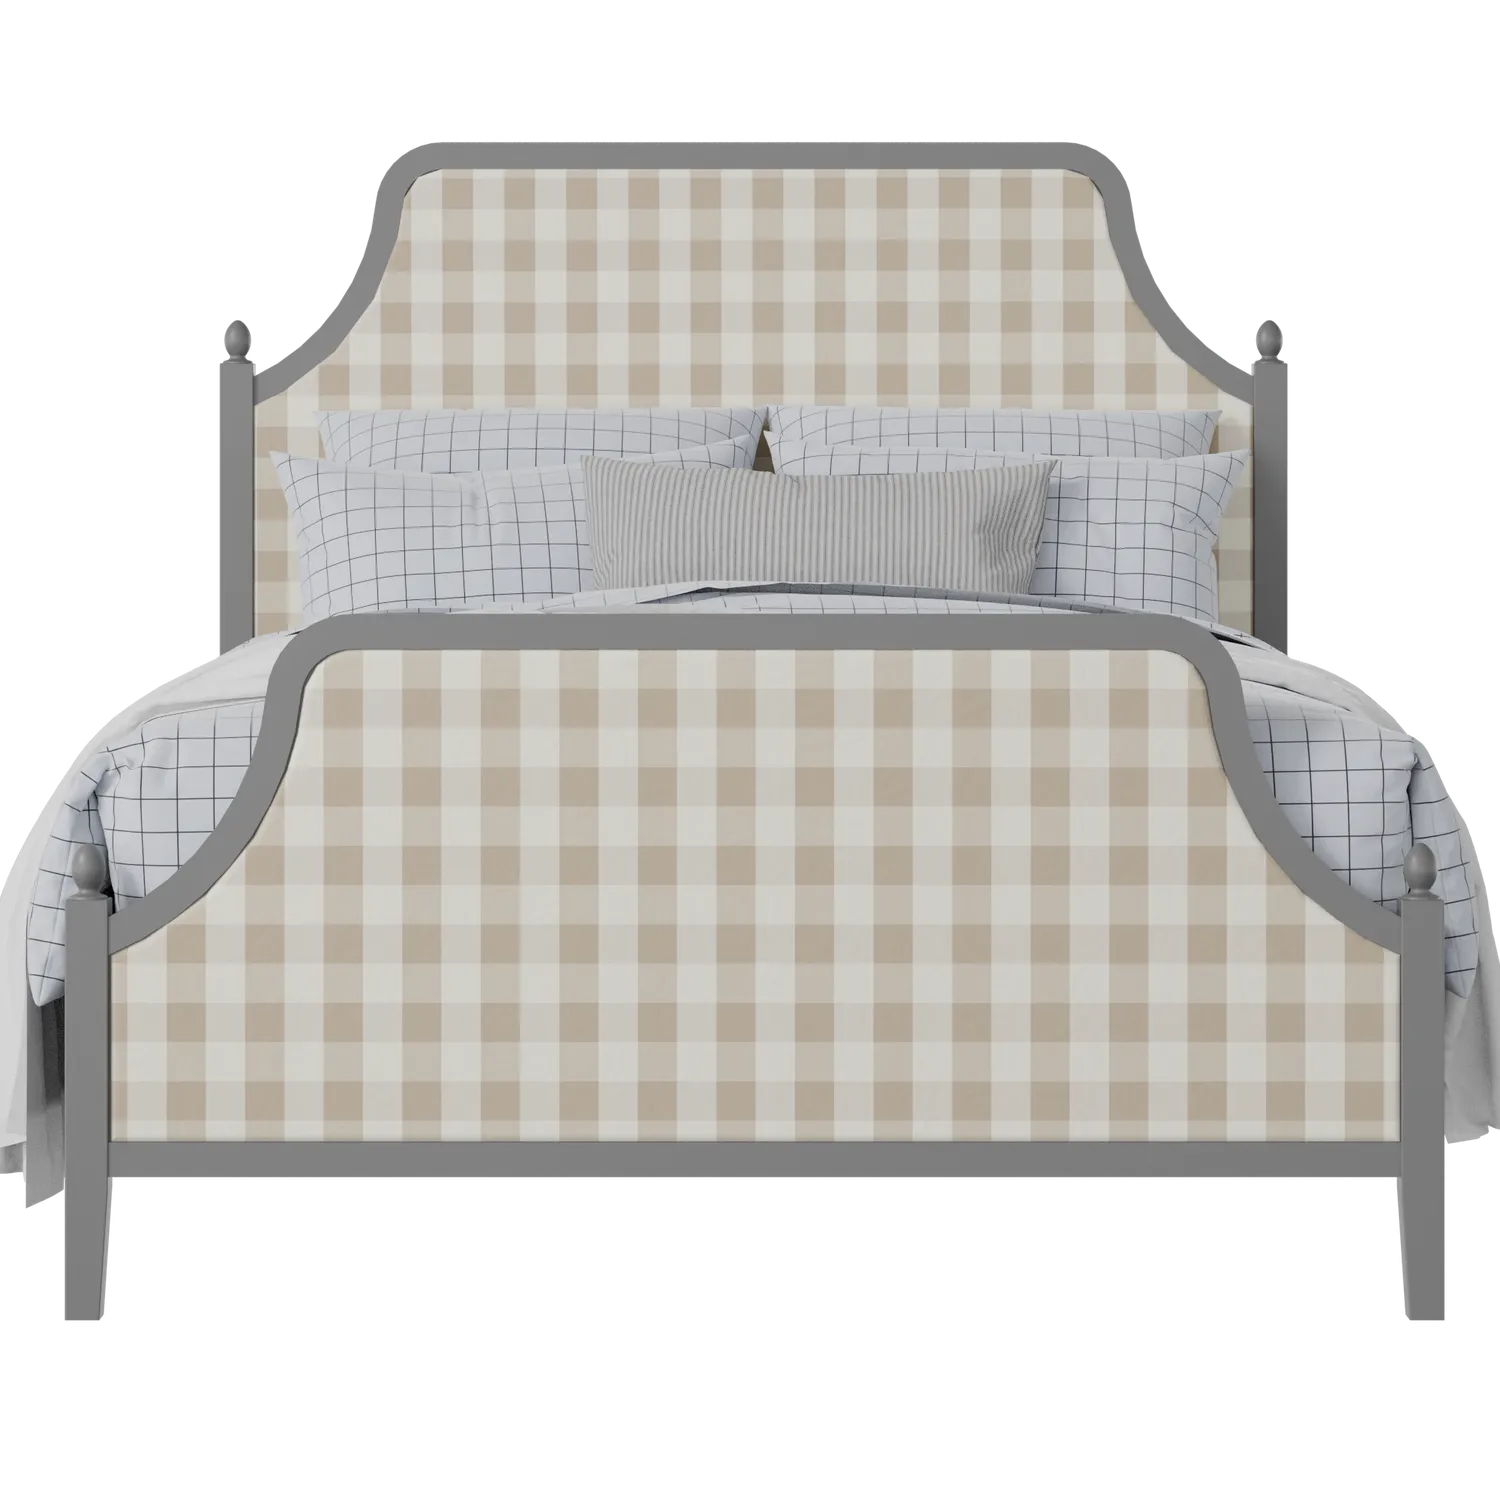 Ruskin Upholstered wood upholstered upholstered bed in grey with Romo Kemble Putty fabric